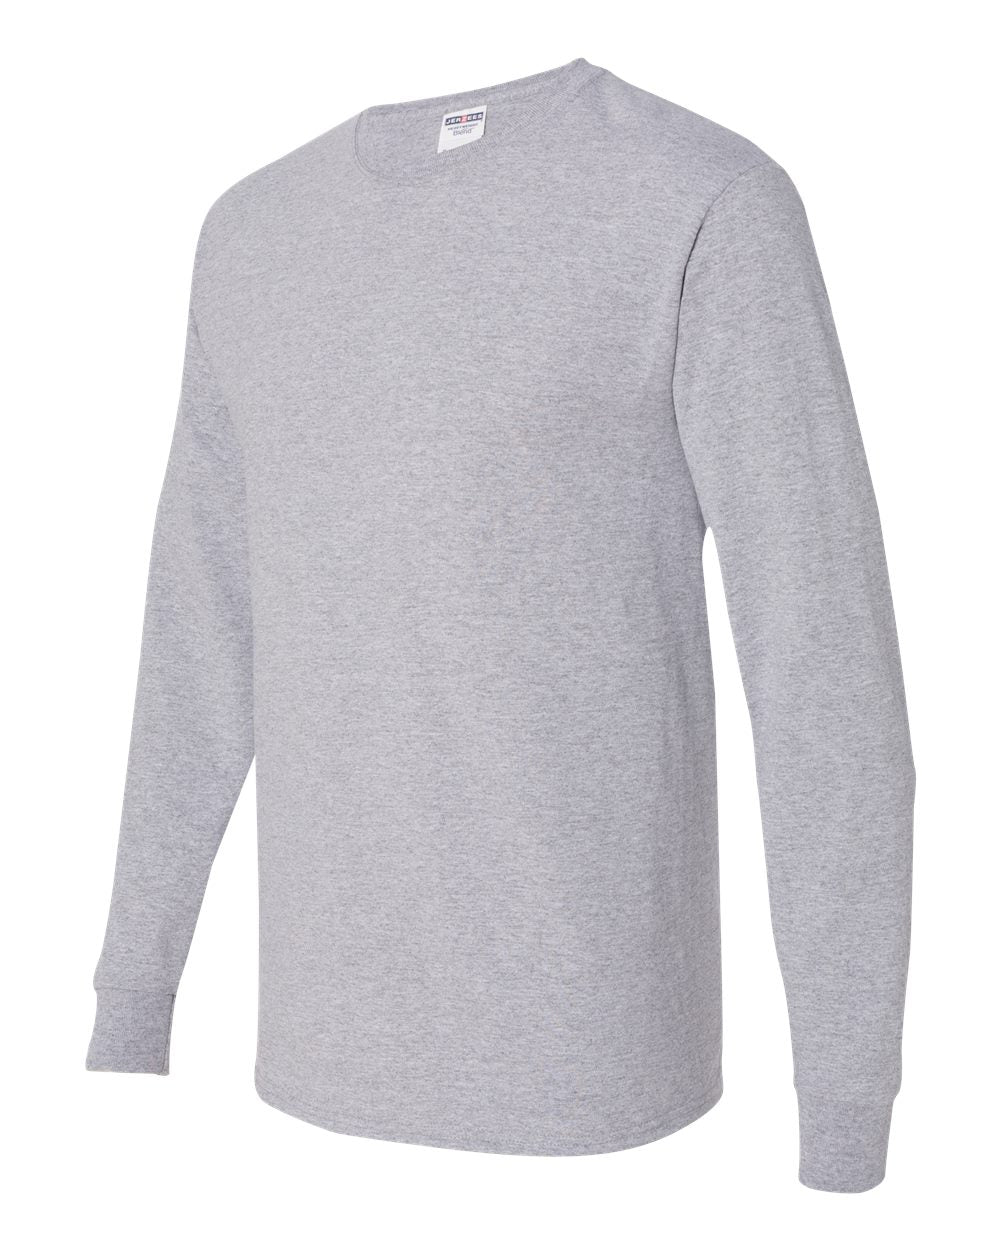 JERZEES Dri-Power® Long Sleeve 50/50 T-Shirt 29LSR #color_Athletic Heather